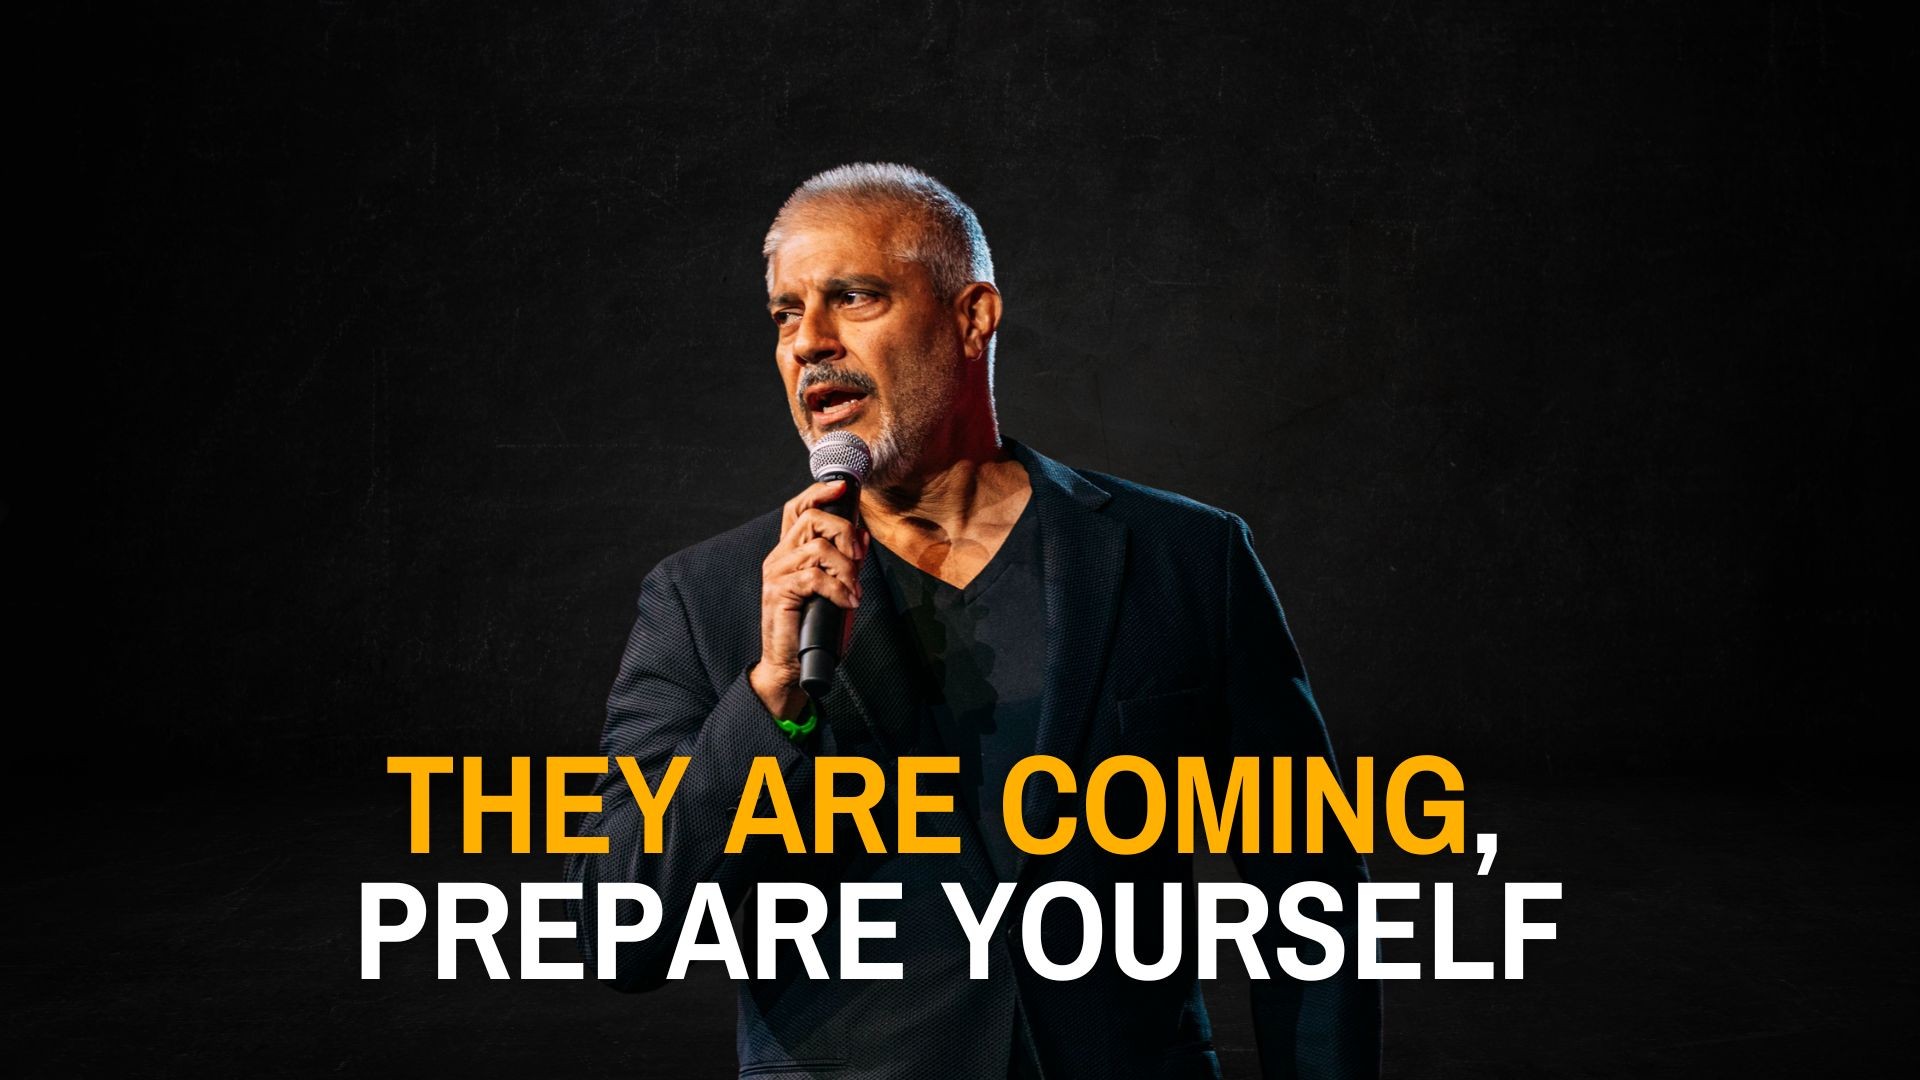 â�£THEY ARE COMING, Don't Be Afraid. Just Get Prepared! - Dr Rashid A Buttar